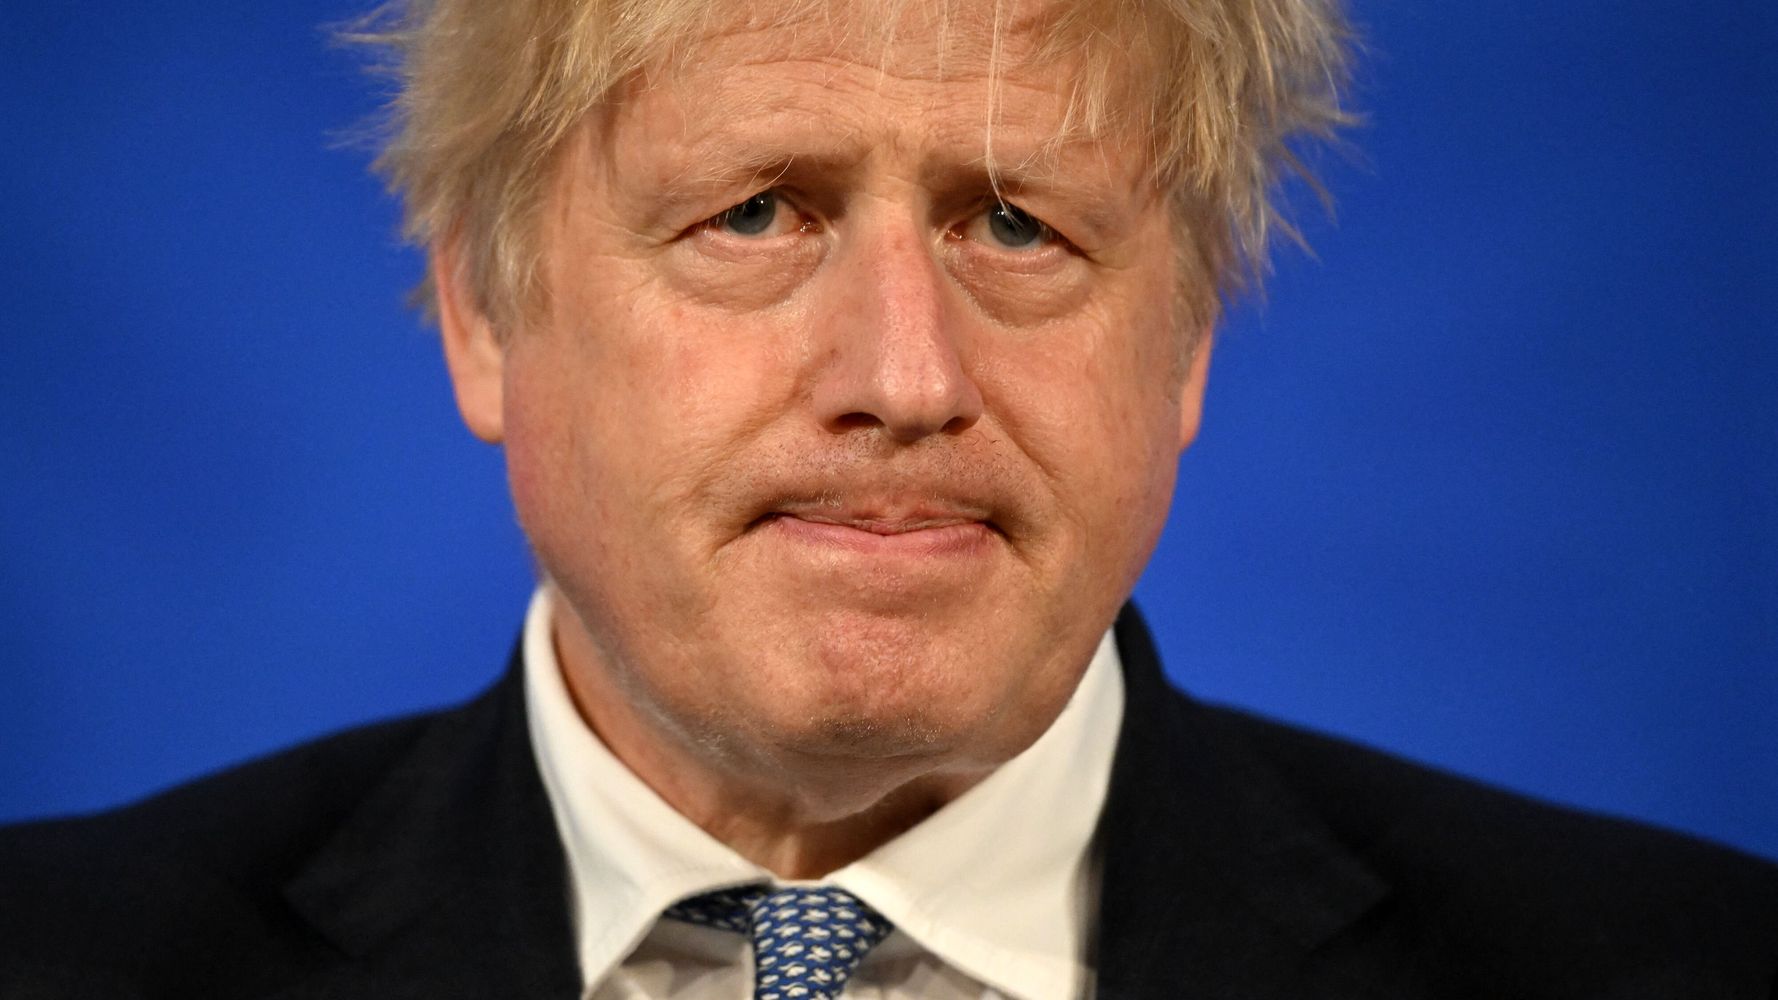 Boris Johnson Will Survive Any Tory Plot To Oust Him, Says Cabinet Minister